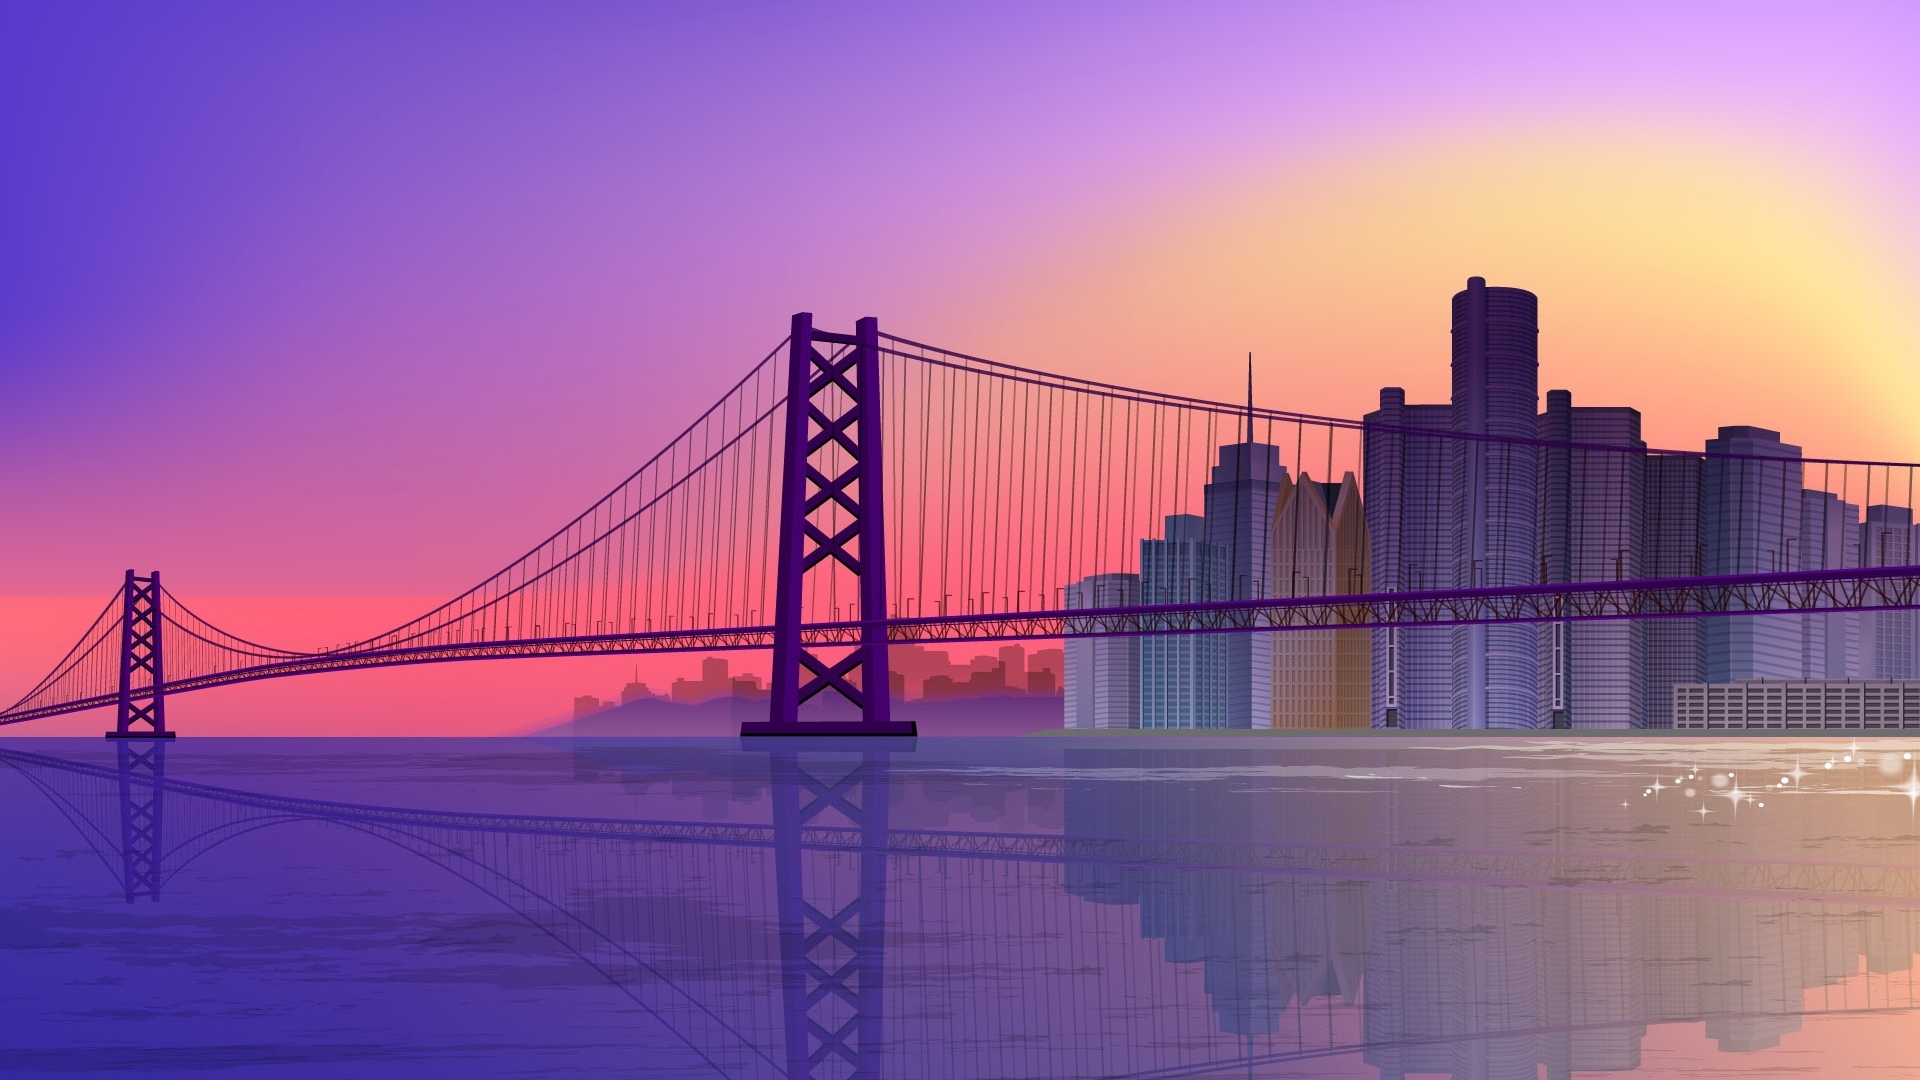 The bridge over the river at sunset in the rendering of the picture